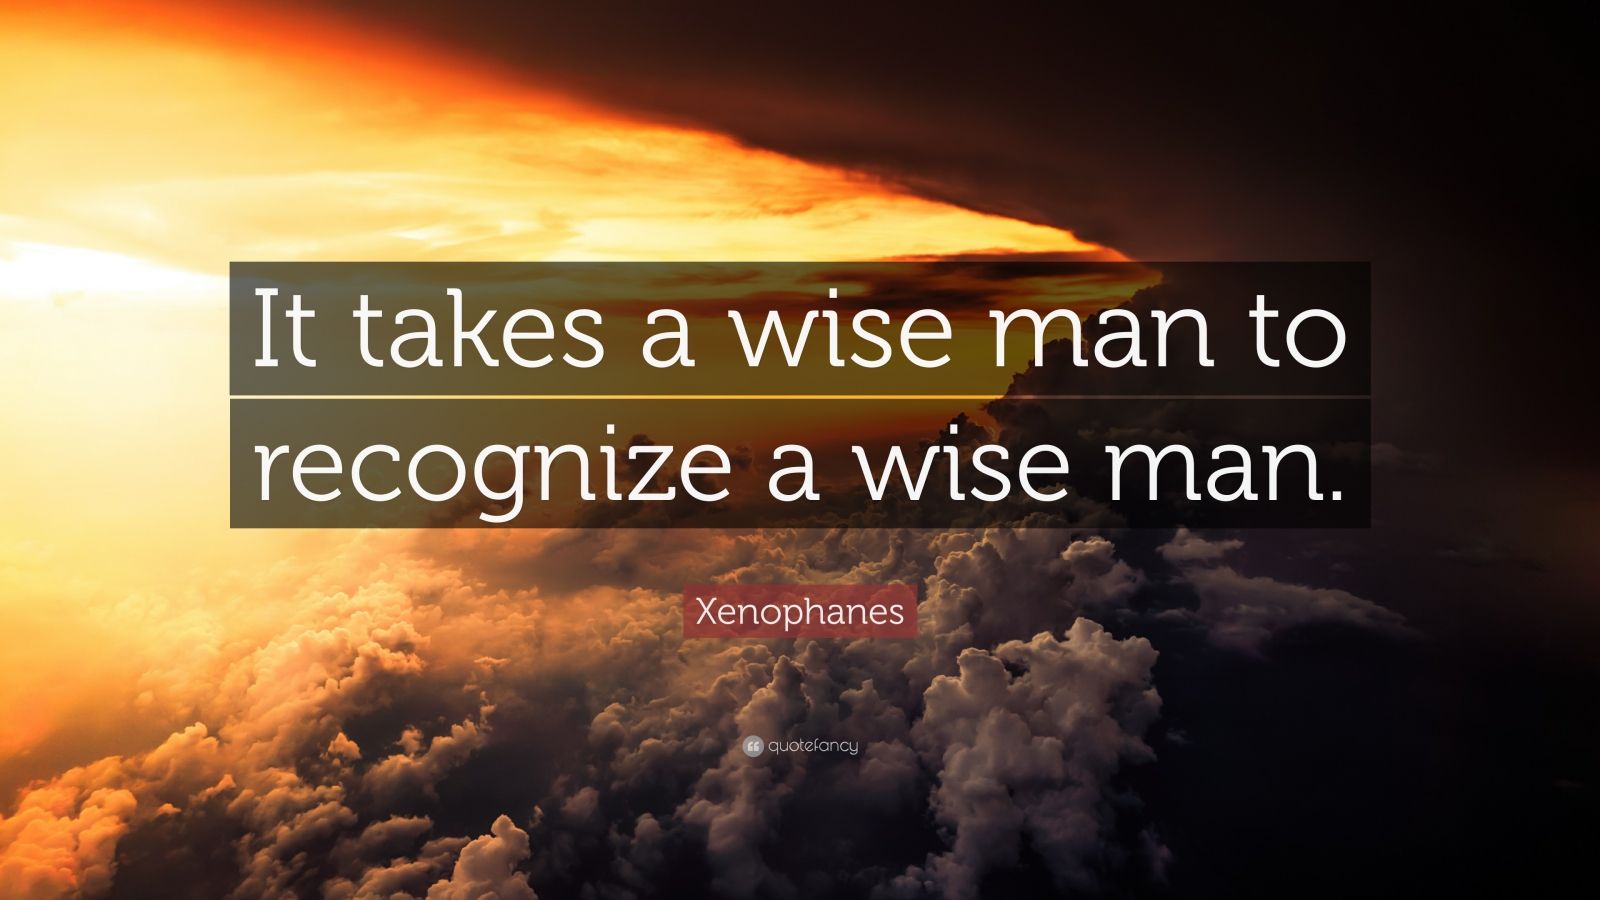 Xenophanes Quote: “It takes a wise man to recognize a wise man.” (10